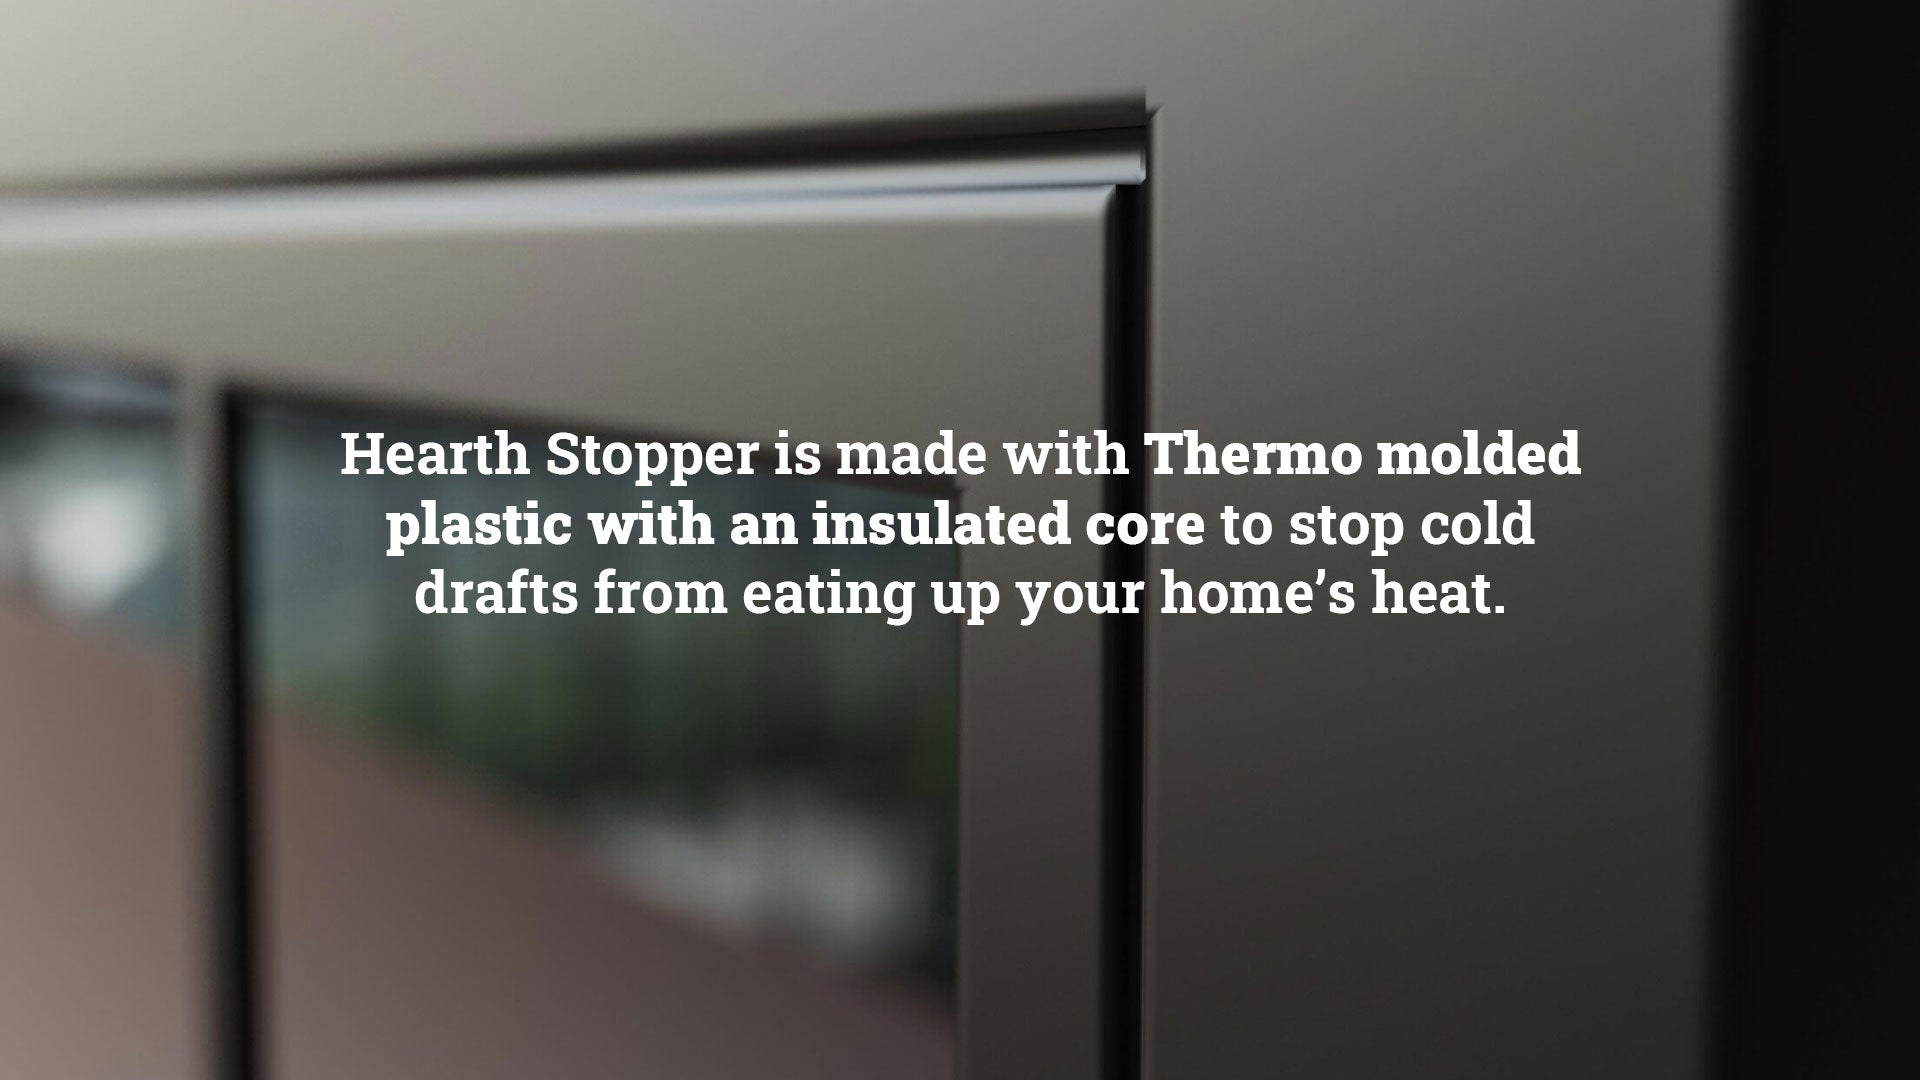 HEARTHSTOPPER-WEB_IMAGES_080623_THERMO-MOLDED